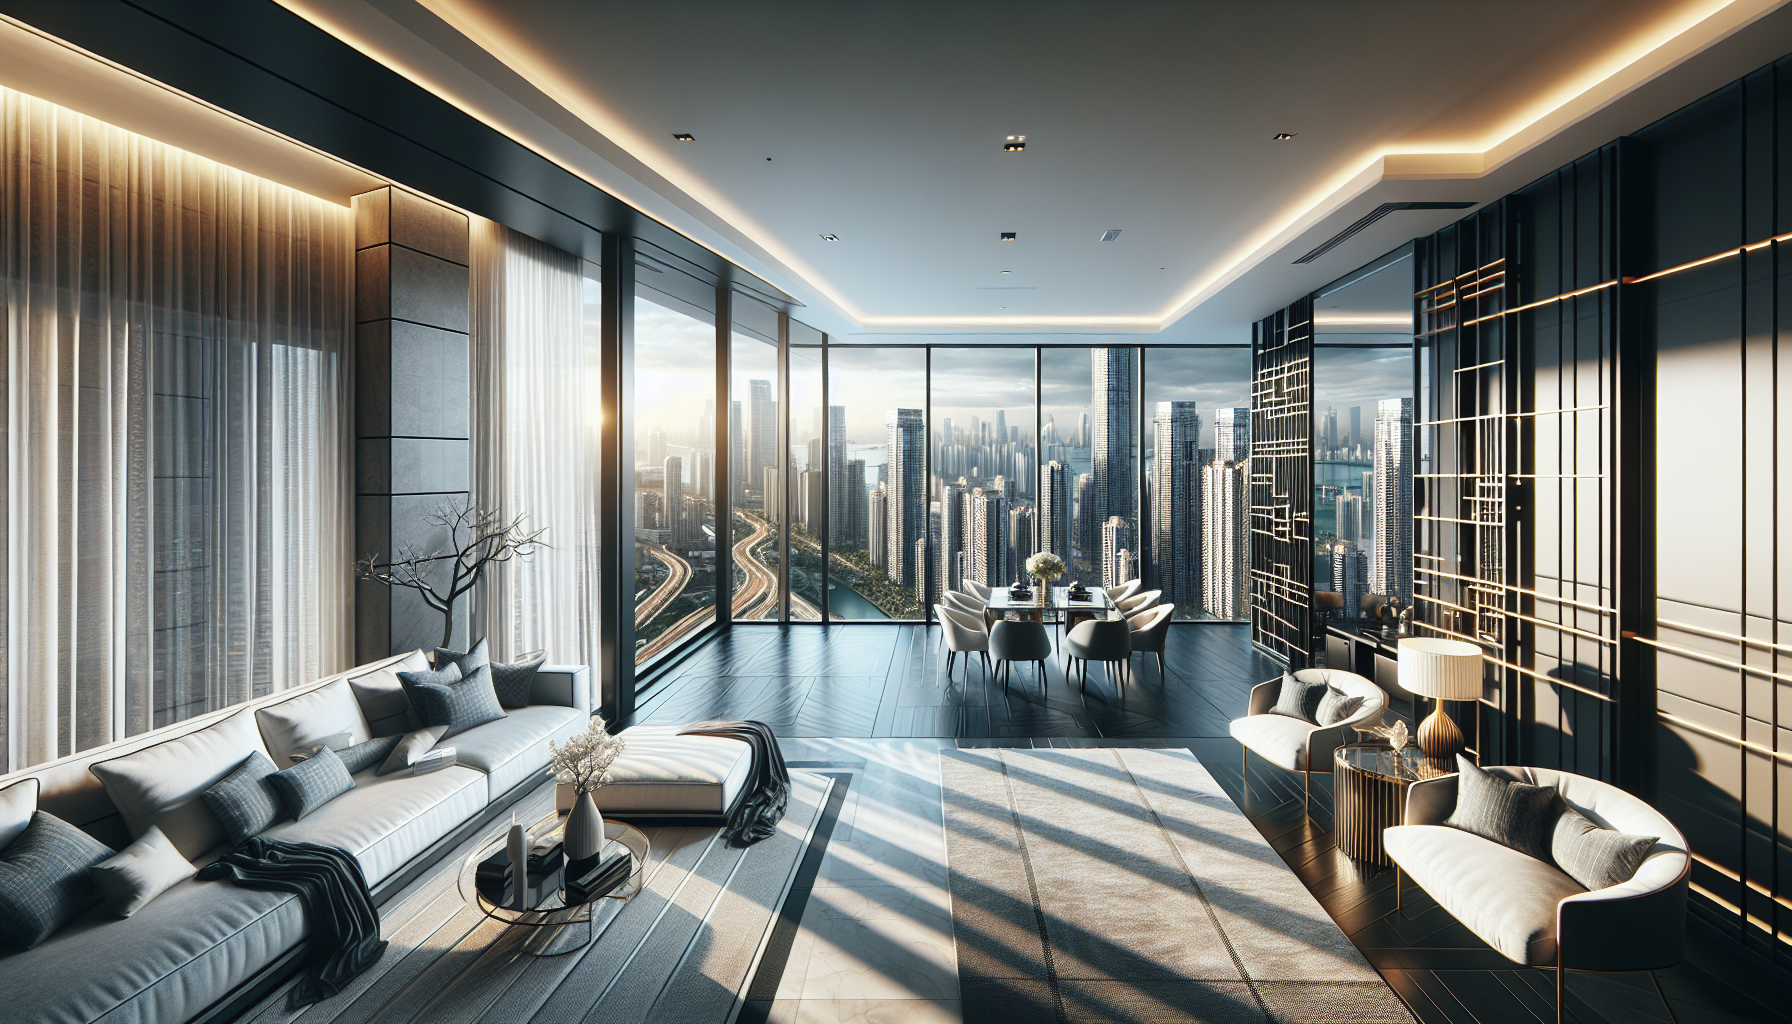 A modern living room in an apartment with a view of the city.